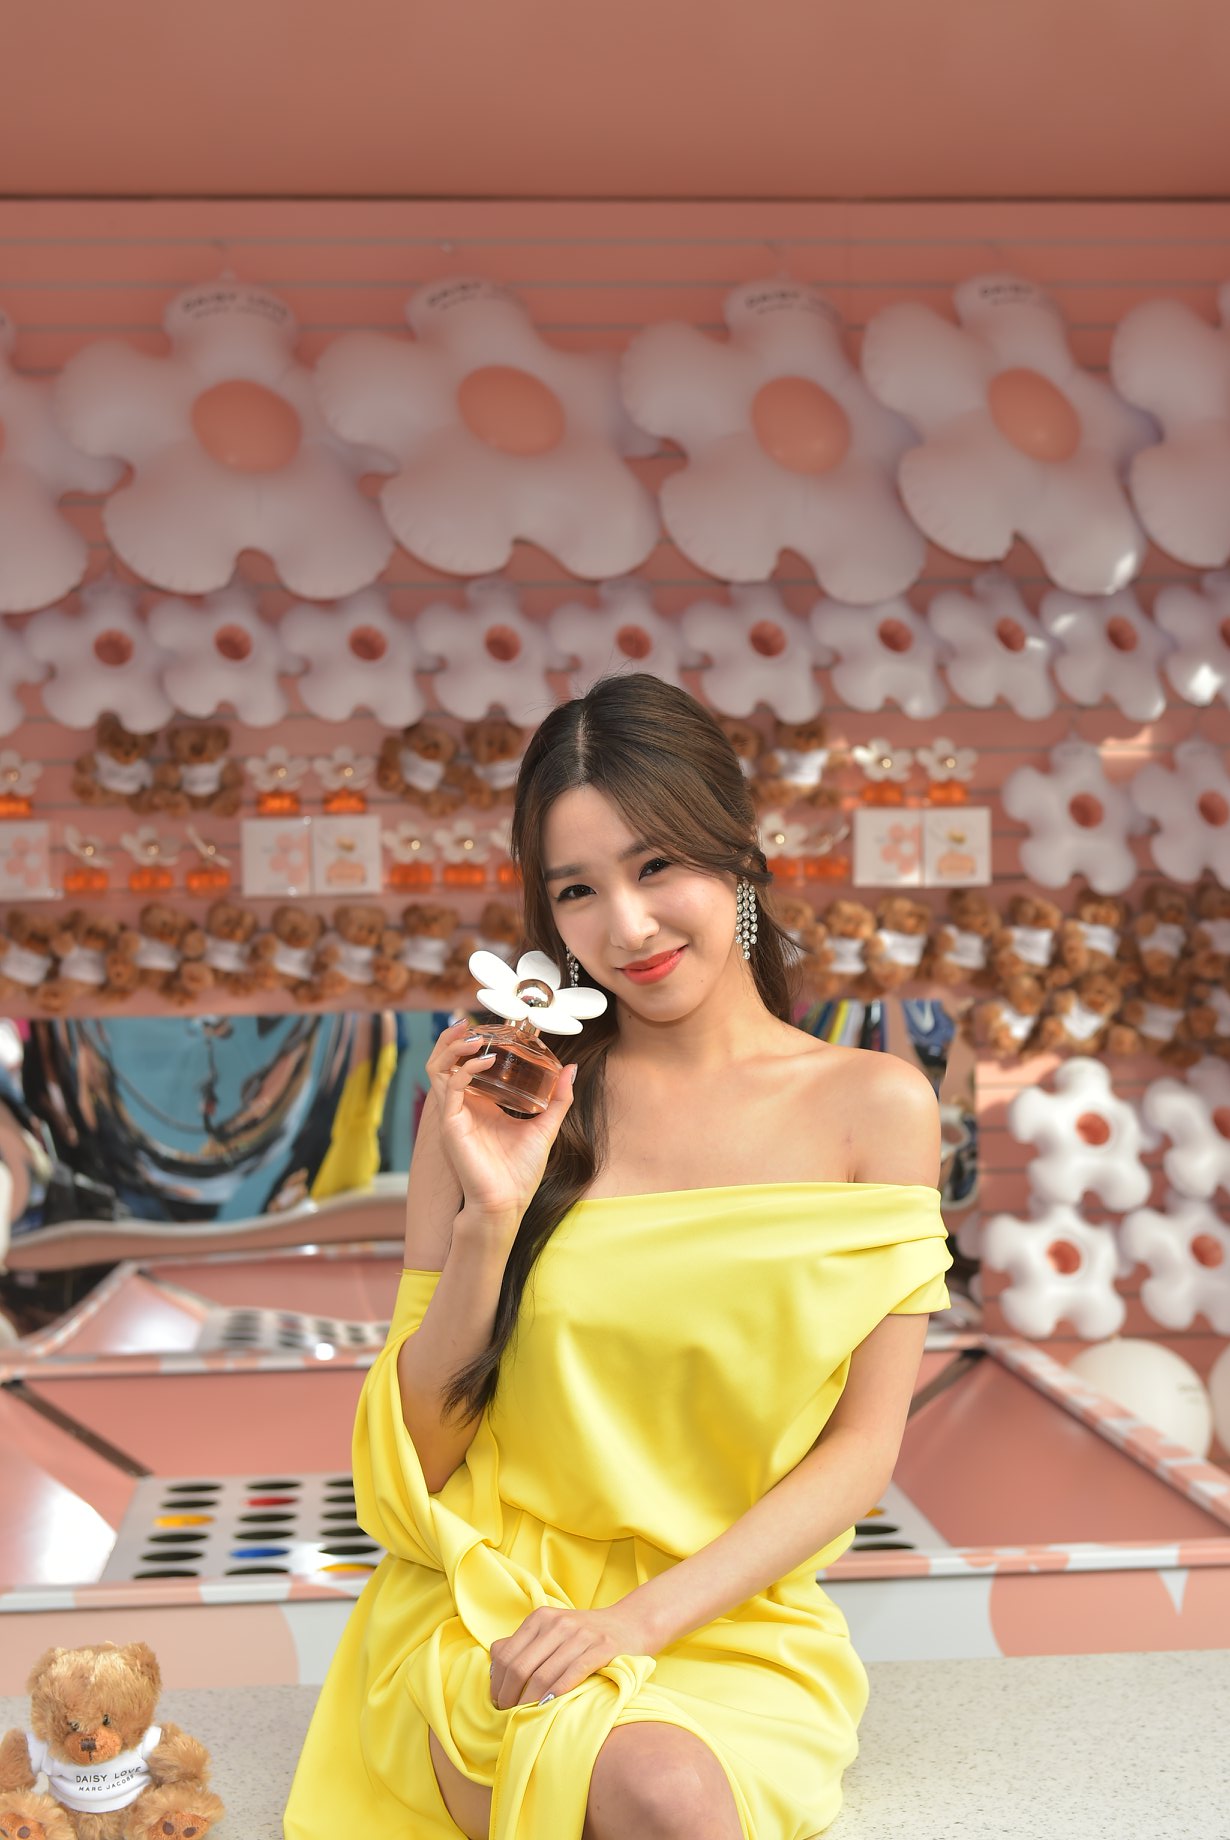 180509 Marc Jacobs Daisy Love Fragrance Launching Event 티파니 by Marc Jacobs (2).jpg